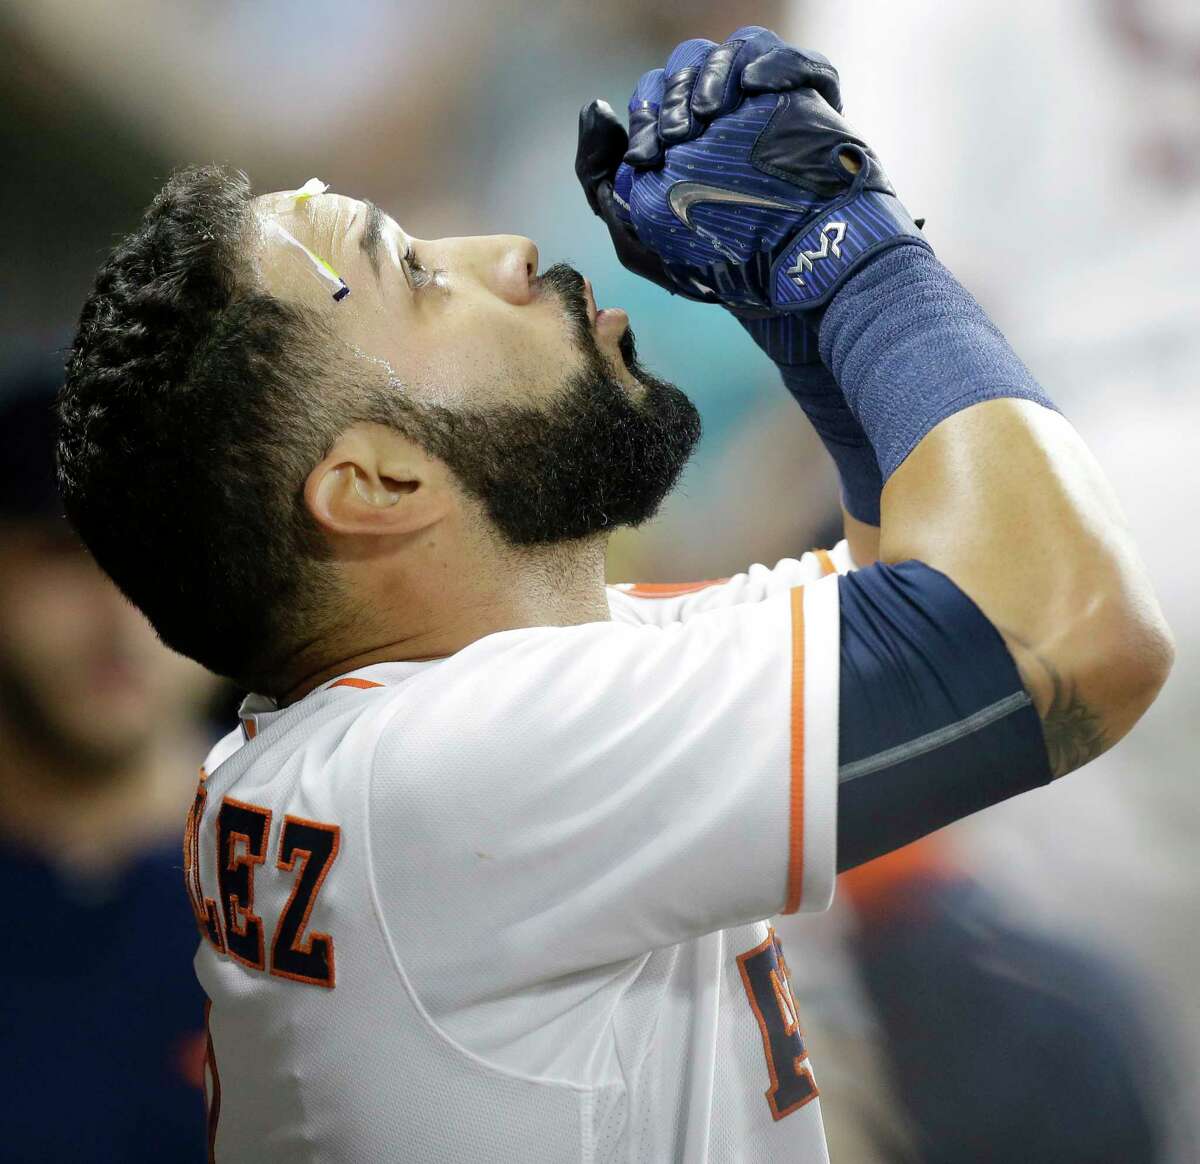 Astros' depth, chemistry and veteran leadership could yield a